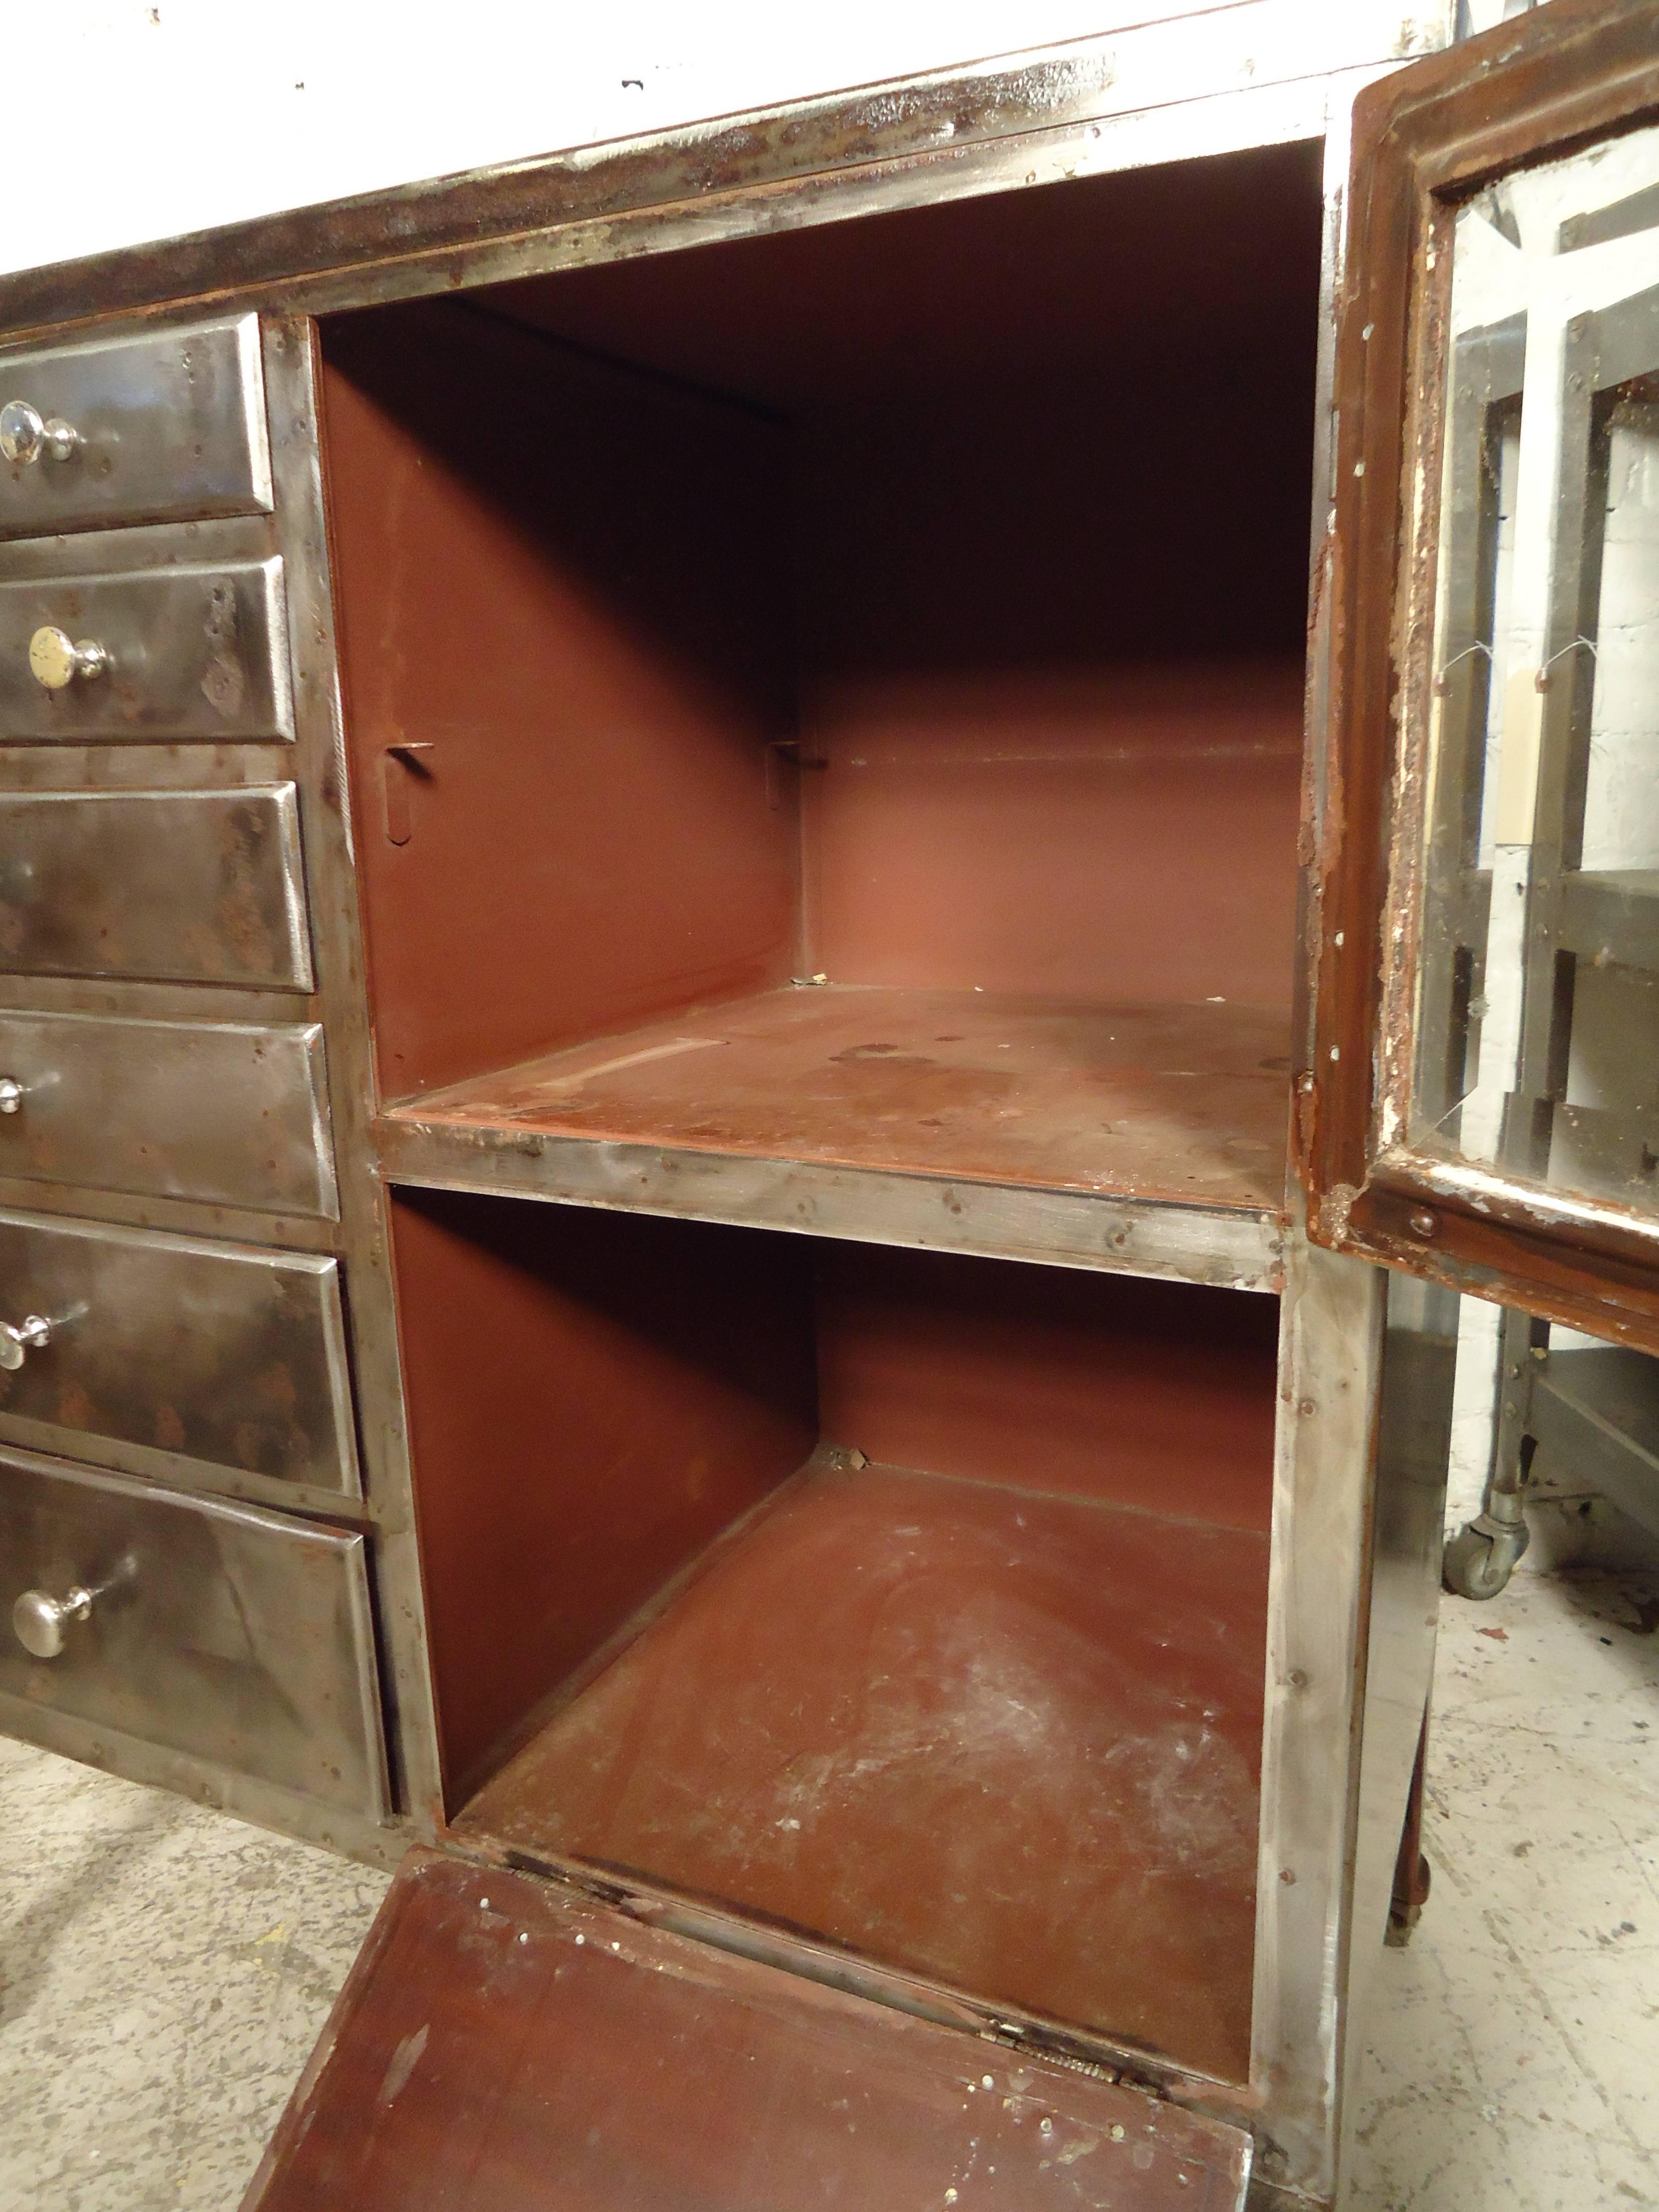 Early 20th Century Industrial Metal Storage Cabinet Restored